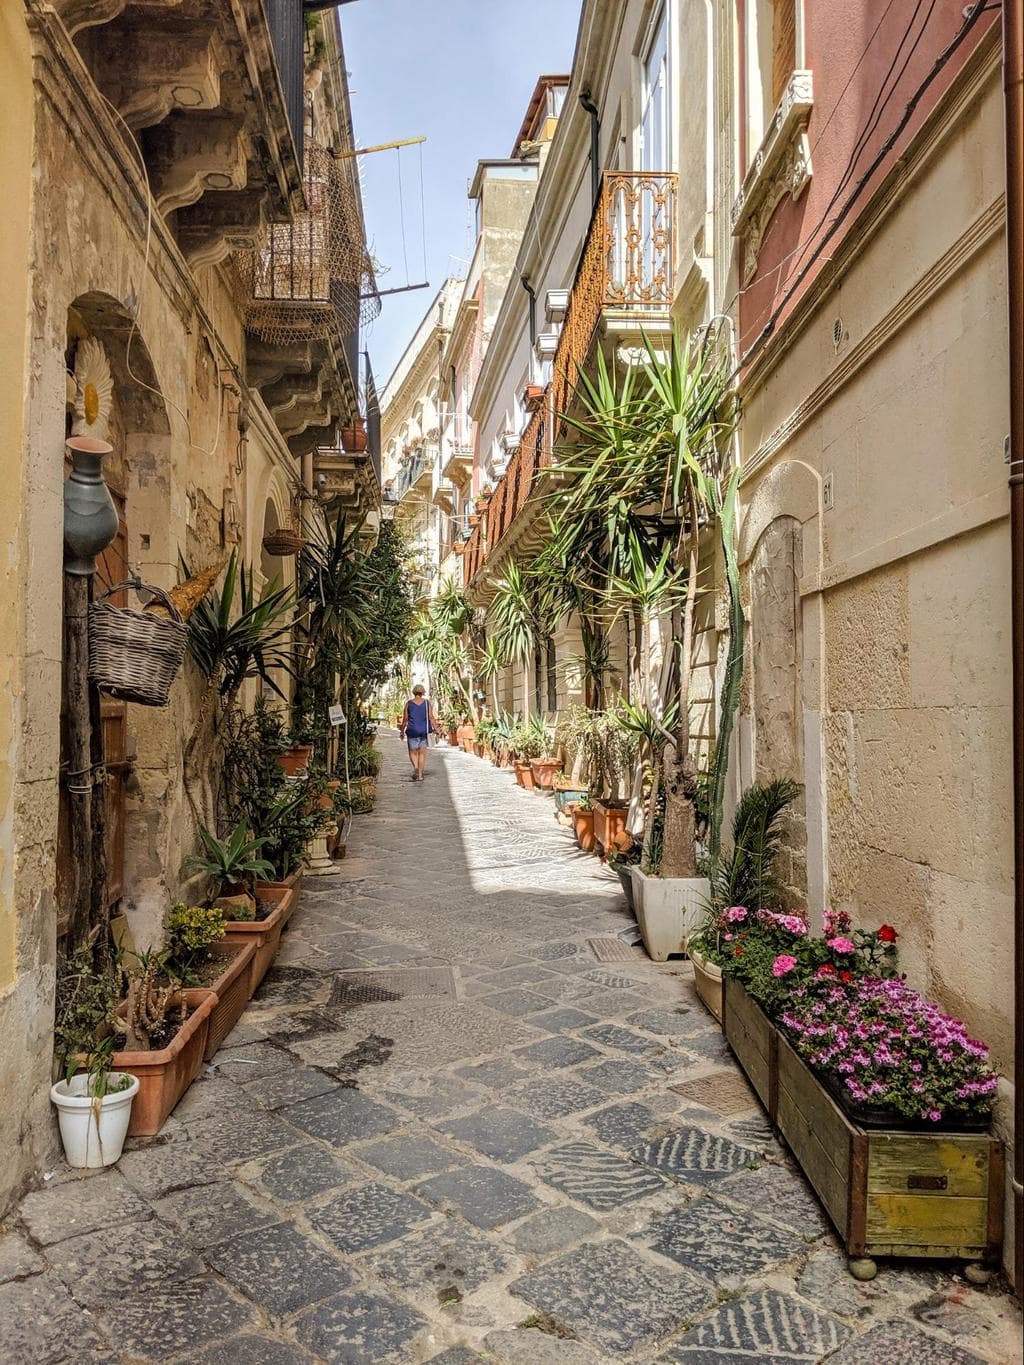 Walk the streets of Ortygia